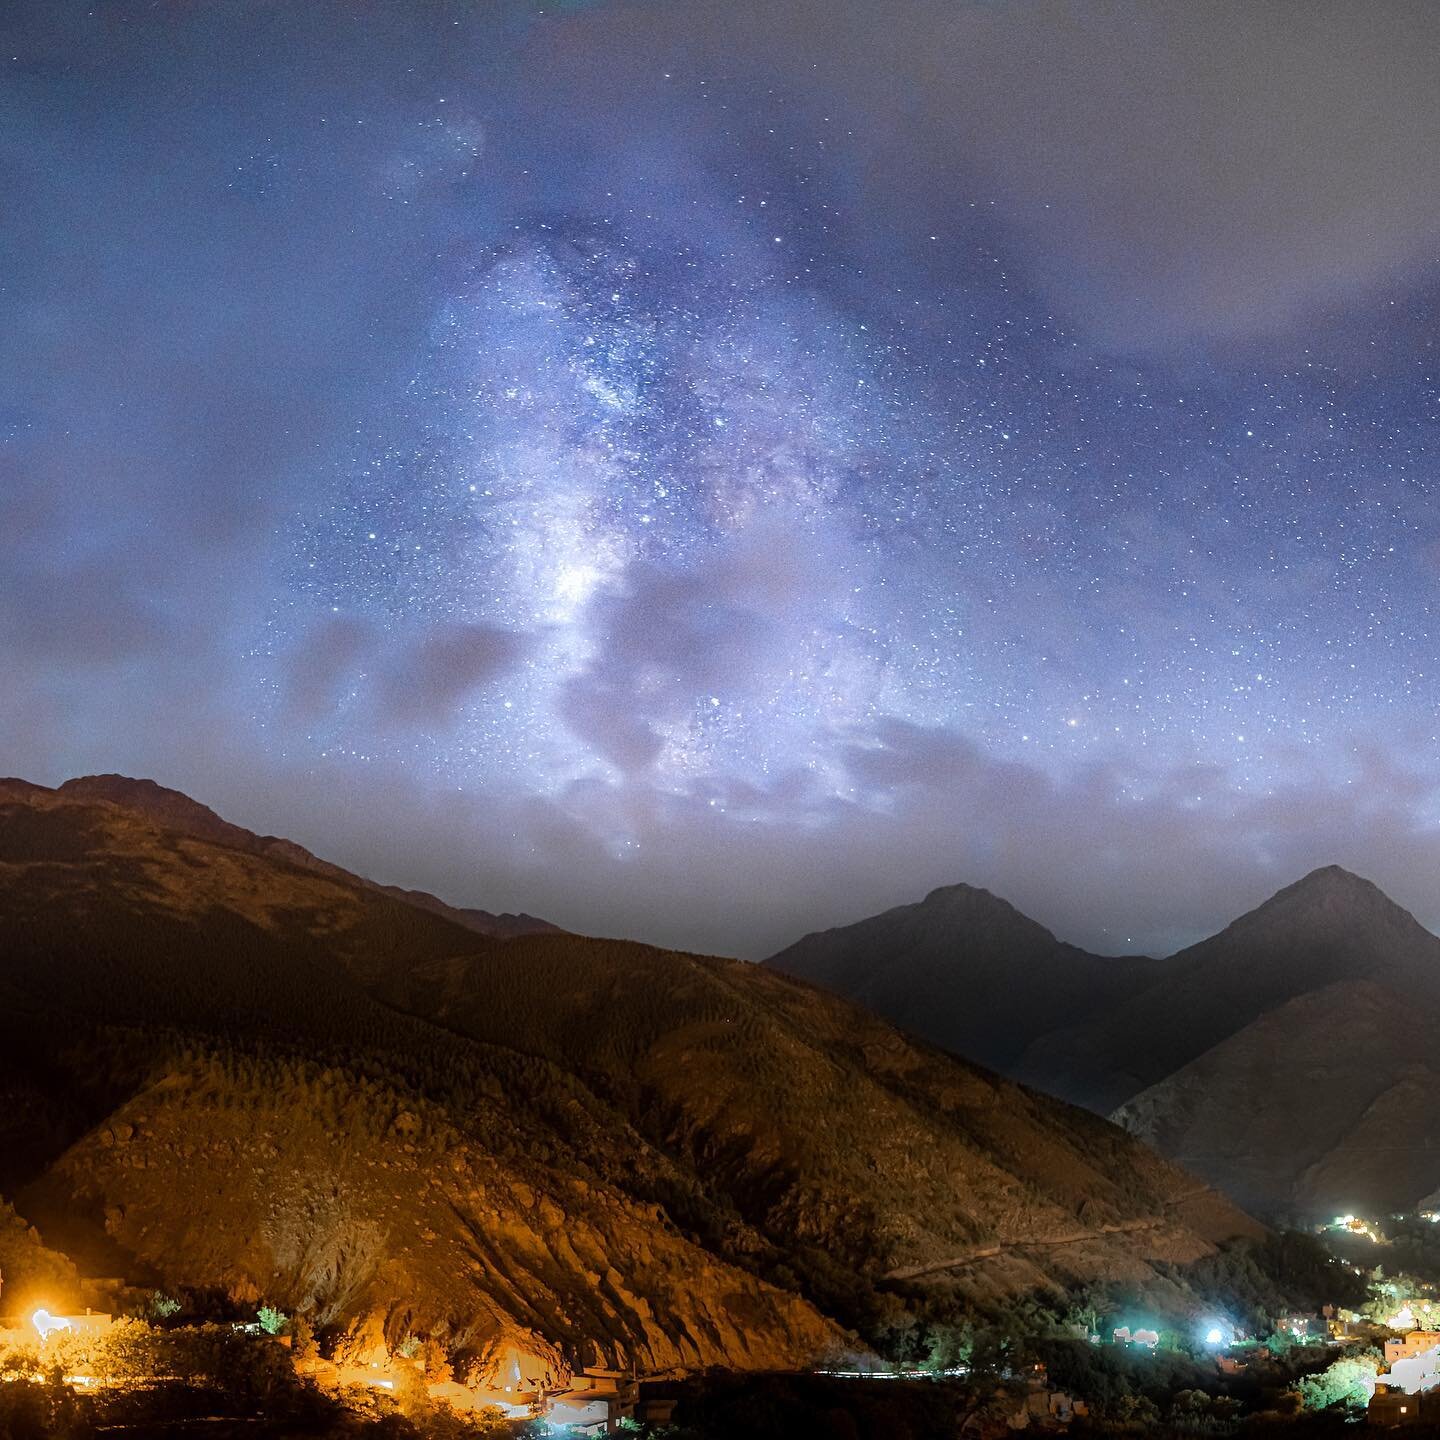 &ldquo;Imlil by Night&rdquo;

Nestled at the feet of giants in the Atlas Mountains, Imlil is a charismatic little town. Here I photographed the milky way rising over the town at night. 

#astro #yourshotphotographer #nightsky #astronomy #mountains #n